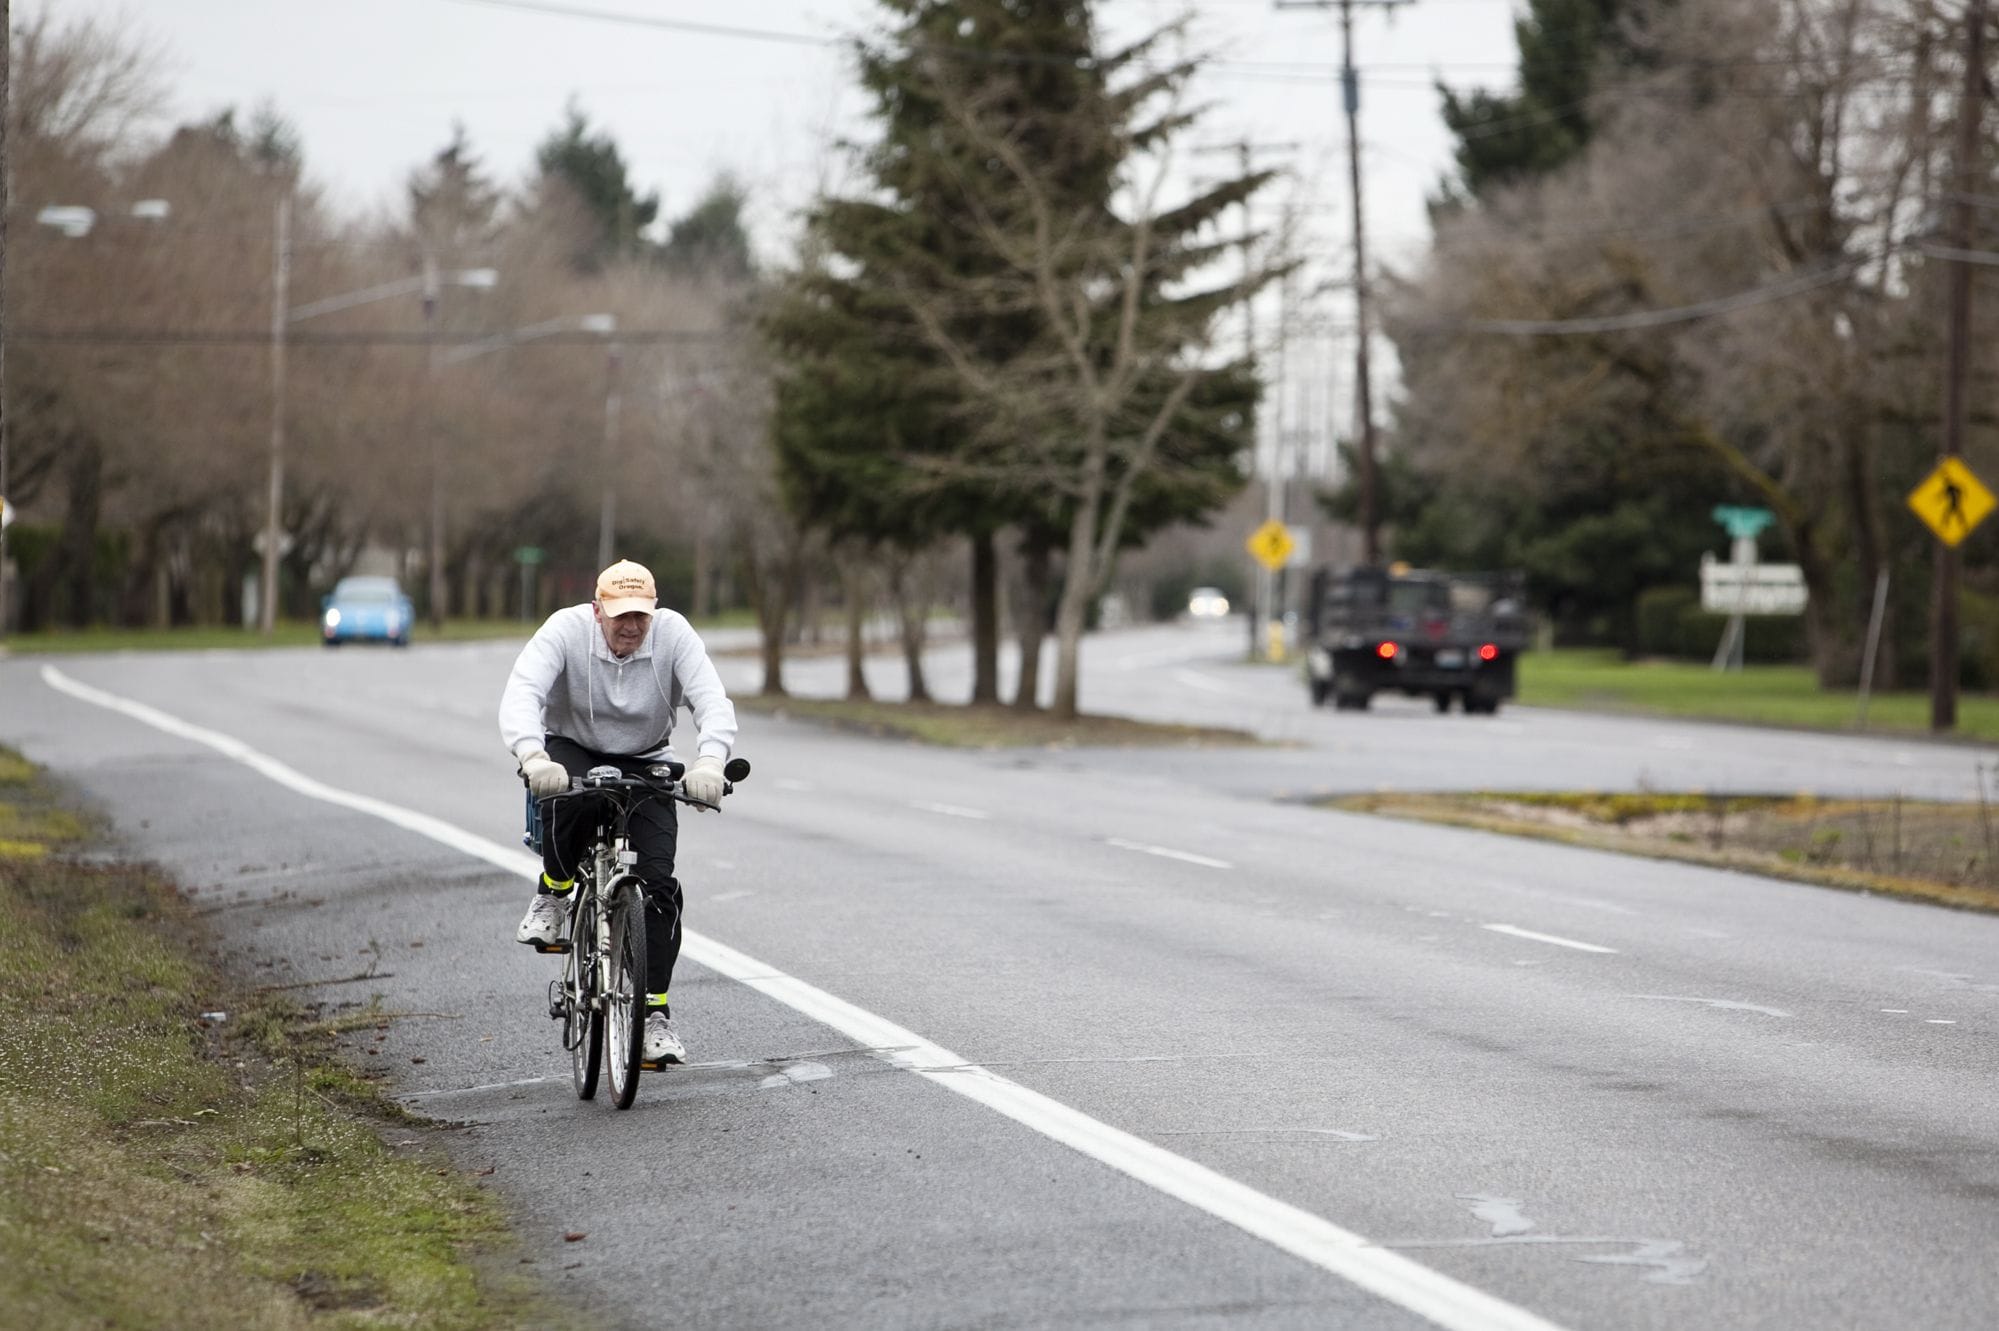 A bicyclist rides in a bike lane on MacArthur Boulevard in 2011. Three years later, bike advocates question why plans for Vancouver's downtown waterfront development don't include bike lanes.